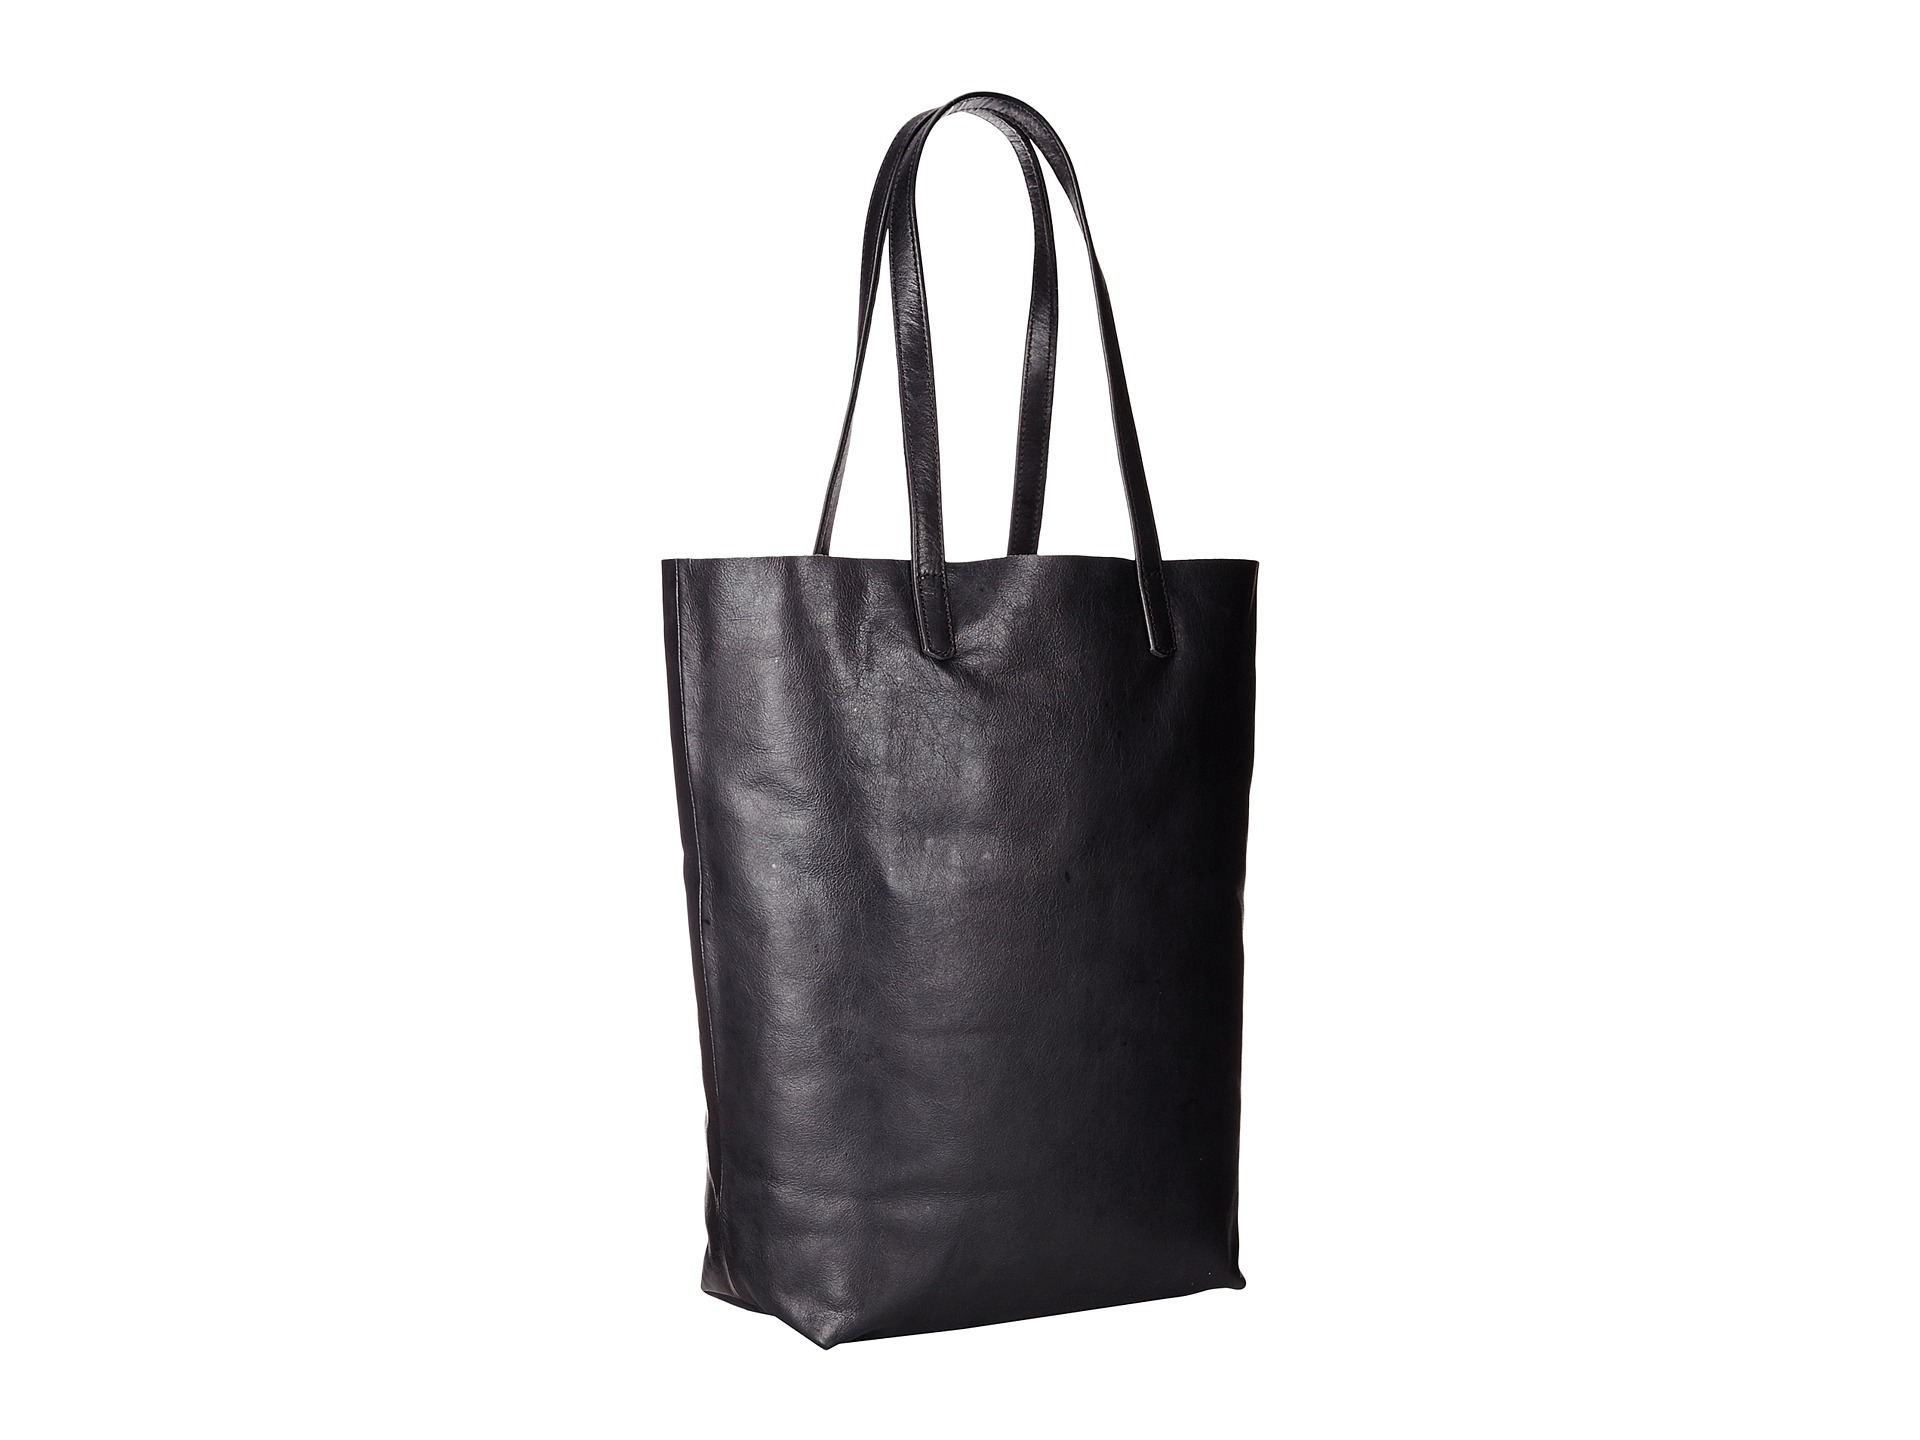 Liebeskind Fashion Tote at Zappos.com